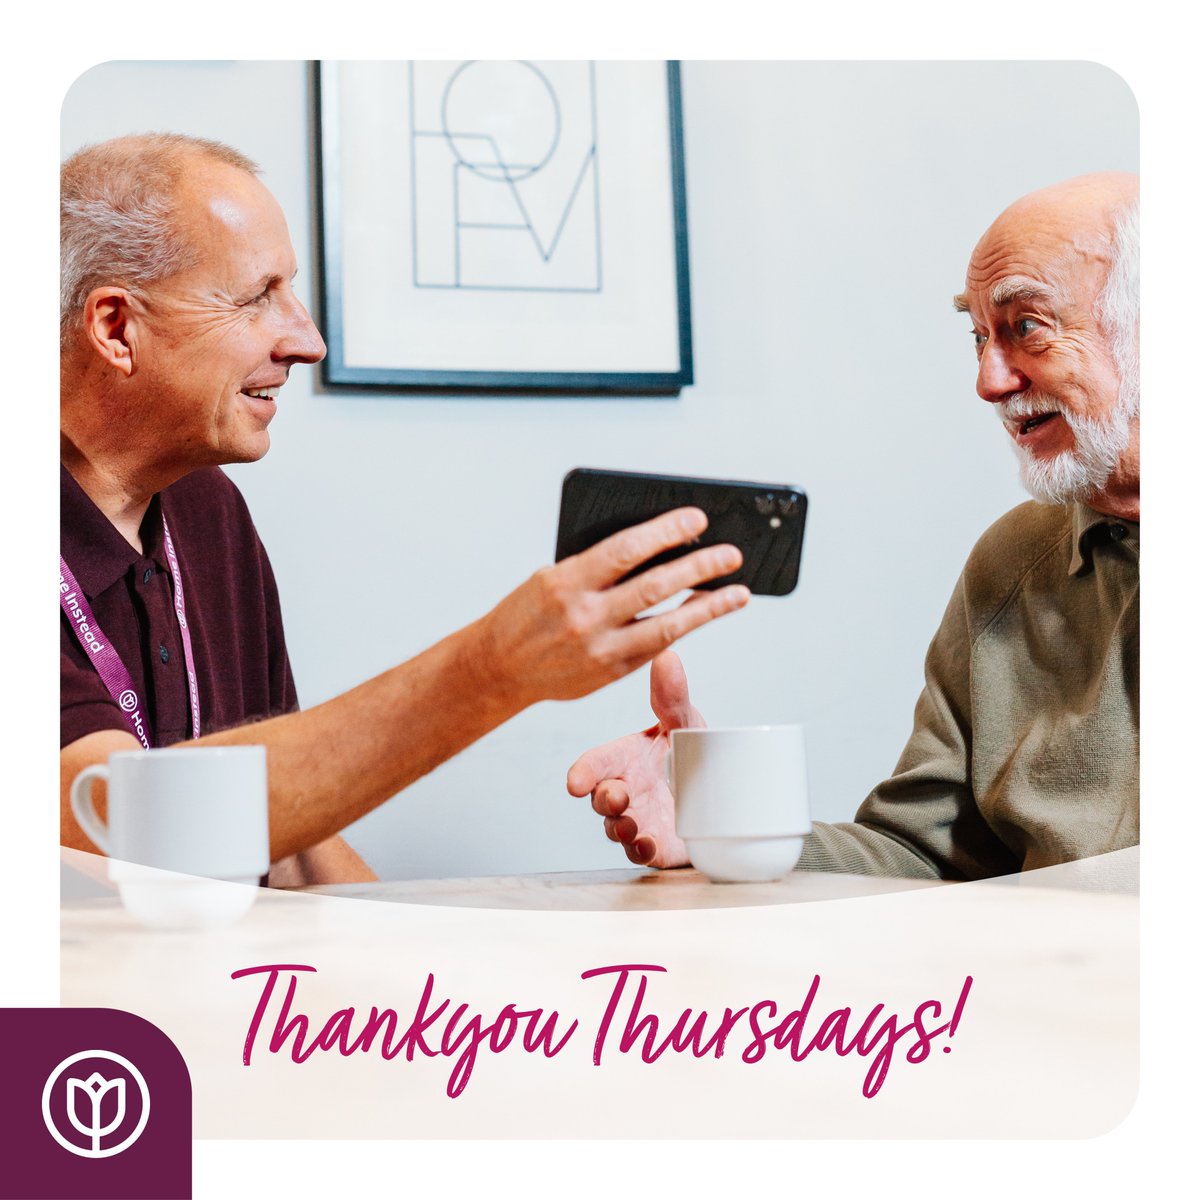 On this thank you Thursday, we'd like to thank our wonderful Care Professionals for always going the extra mile to make a difference in our clients' lives 💜

#ThankYouThursdays #Livingston #westlothian